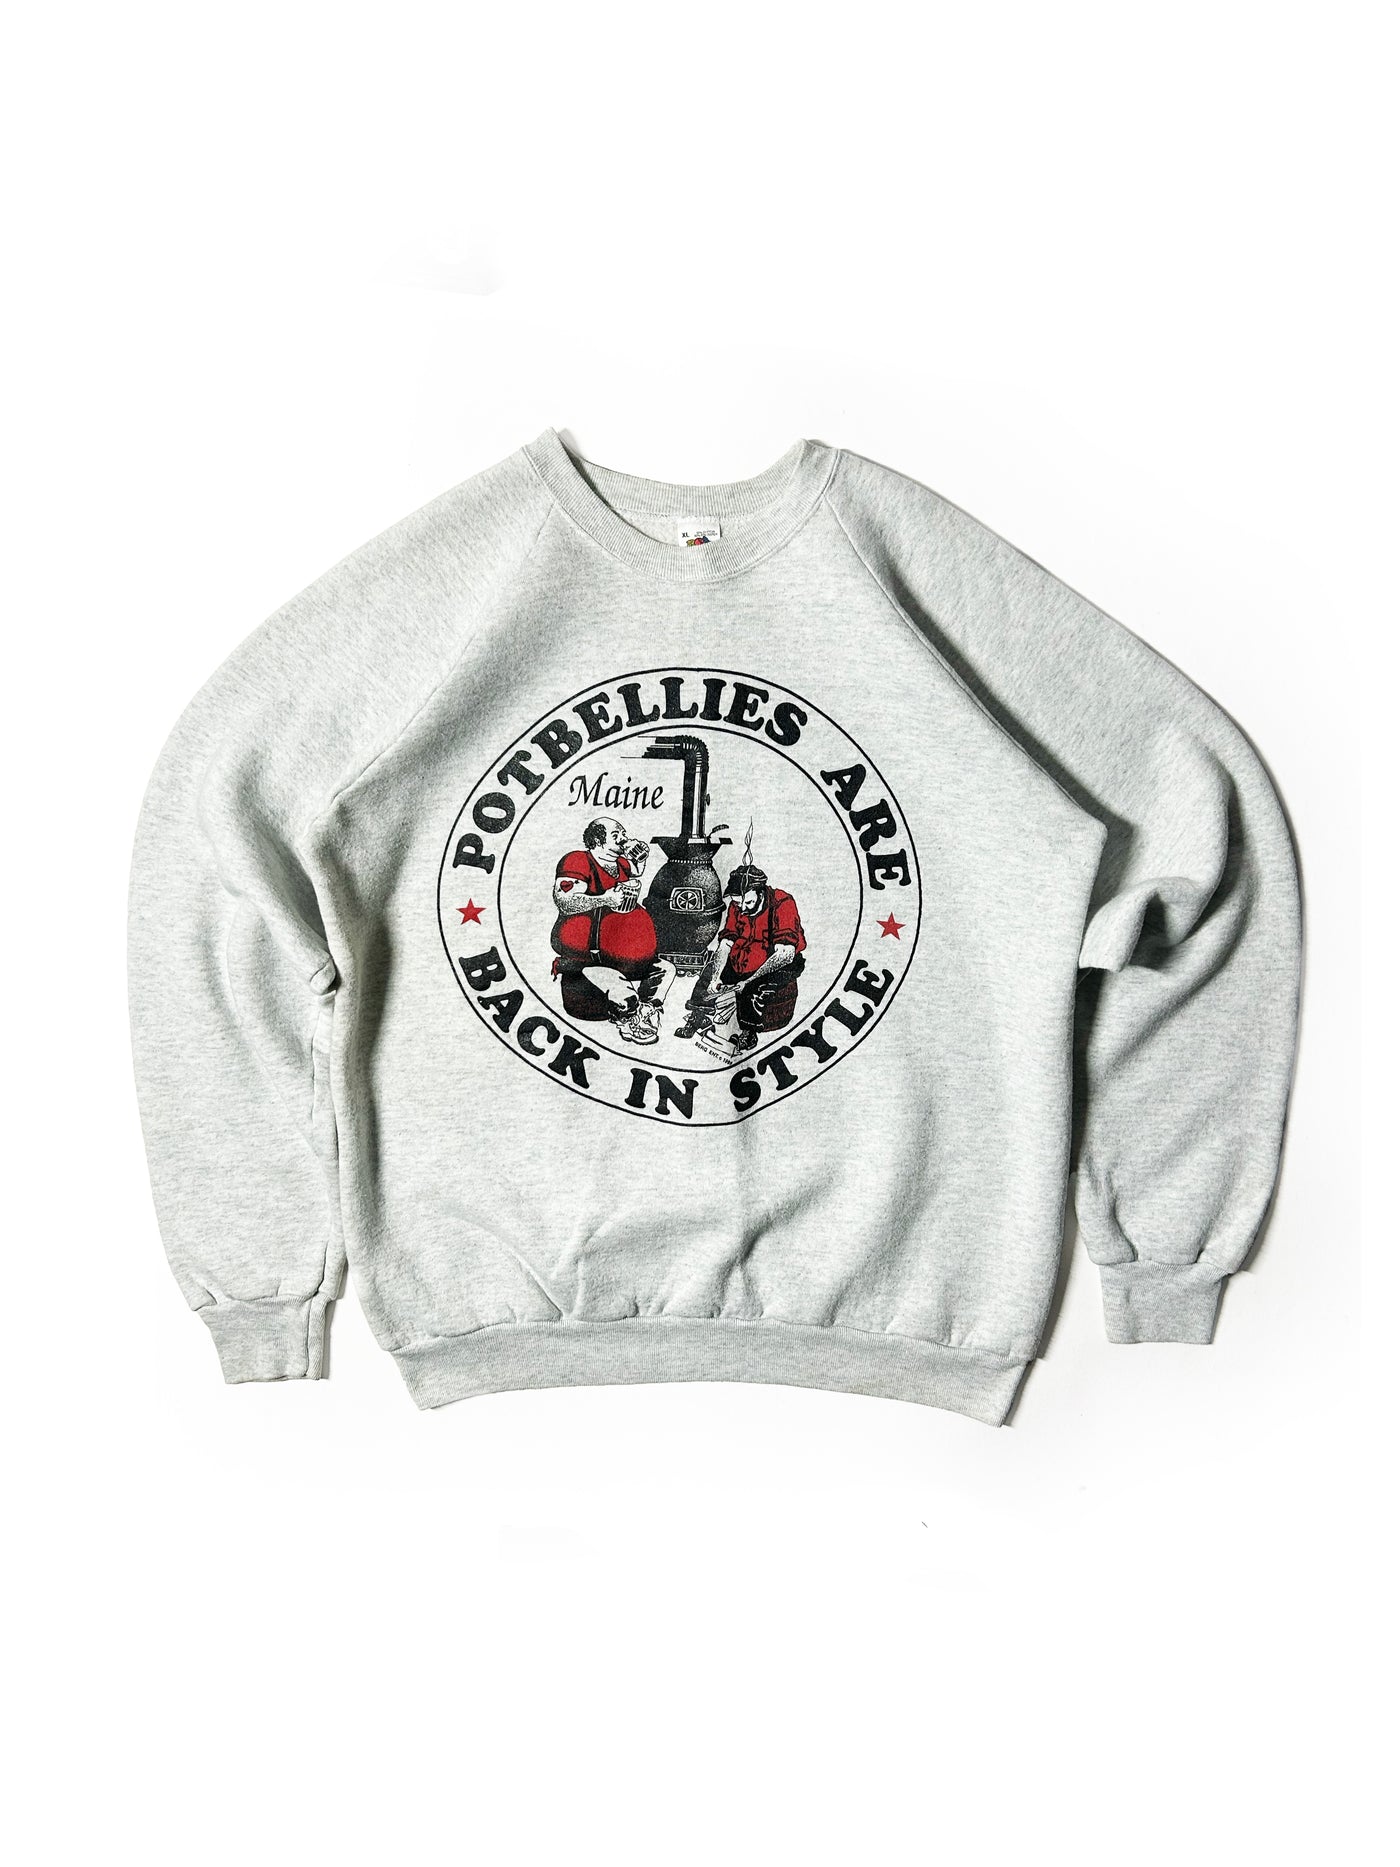 Vintage 1989 'Potbellies are Back in Style' Maine Crewneck